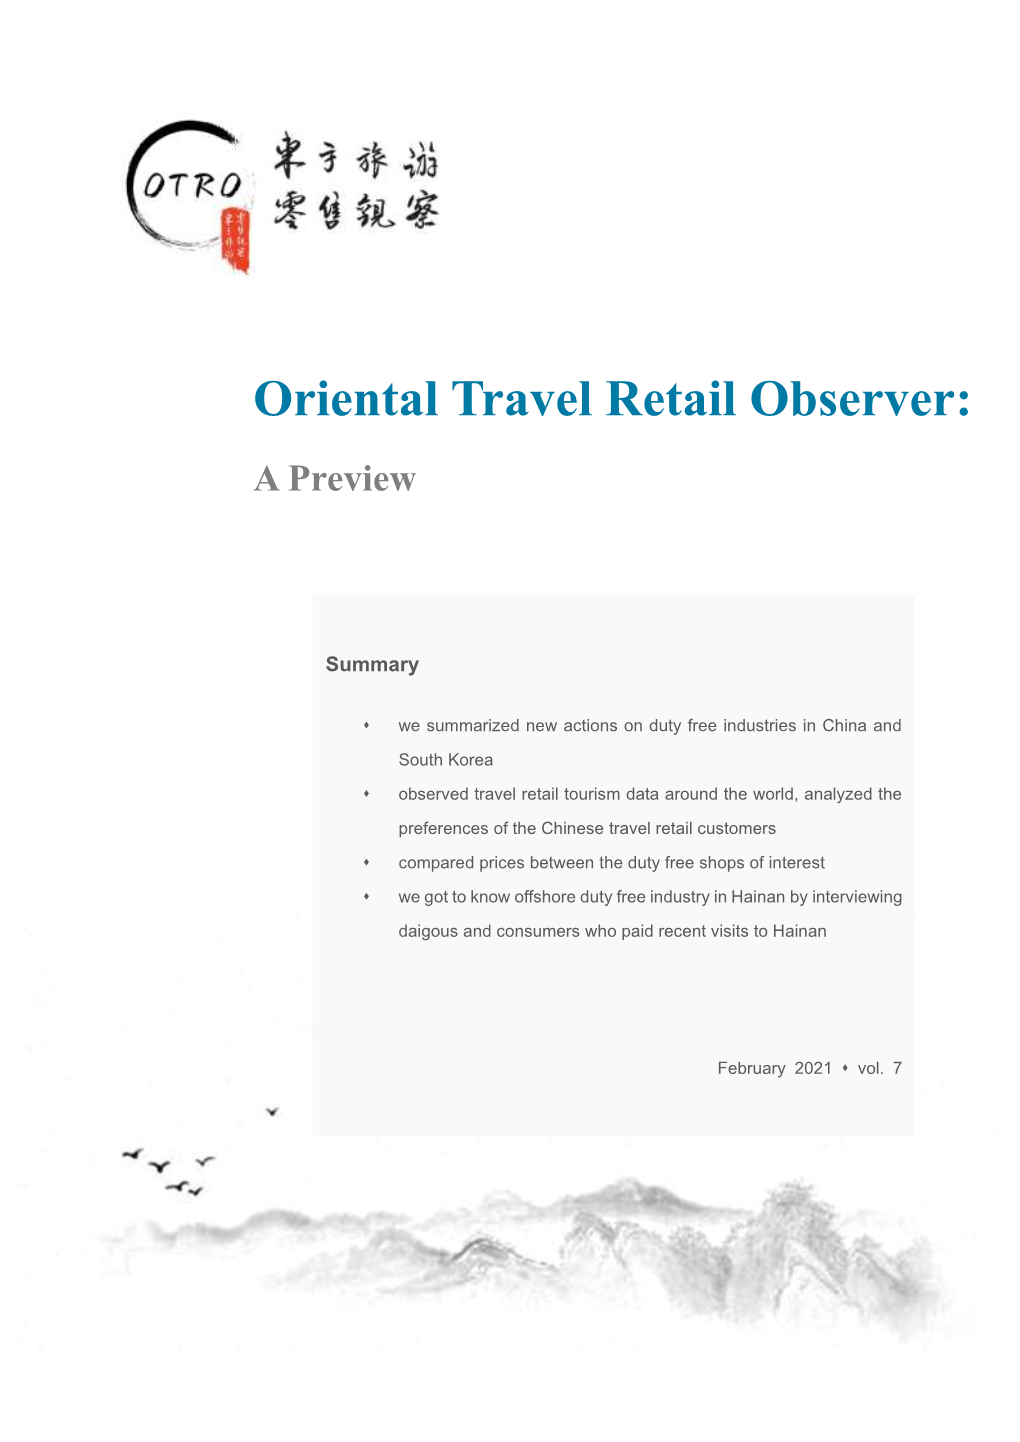 Oriental Travel Retail Observer: a Preview